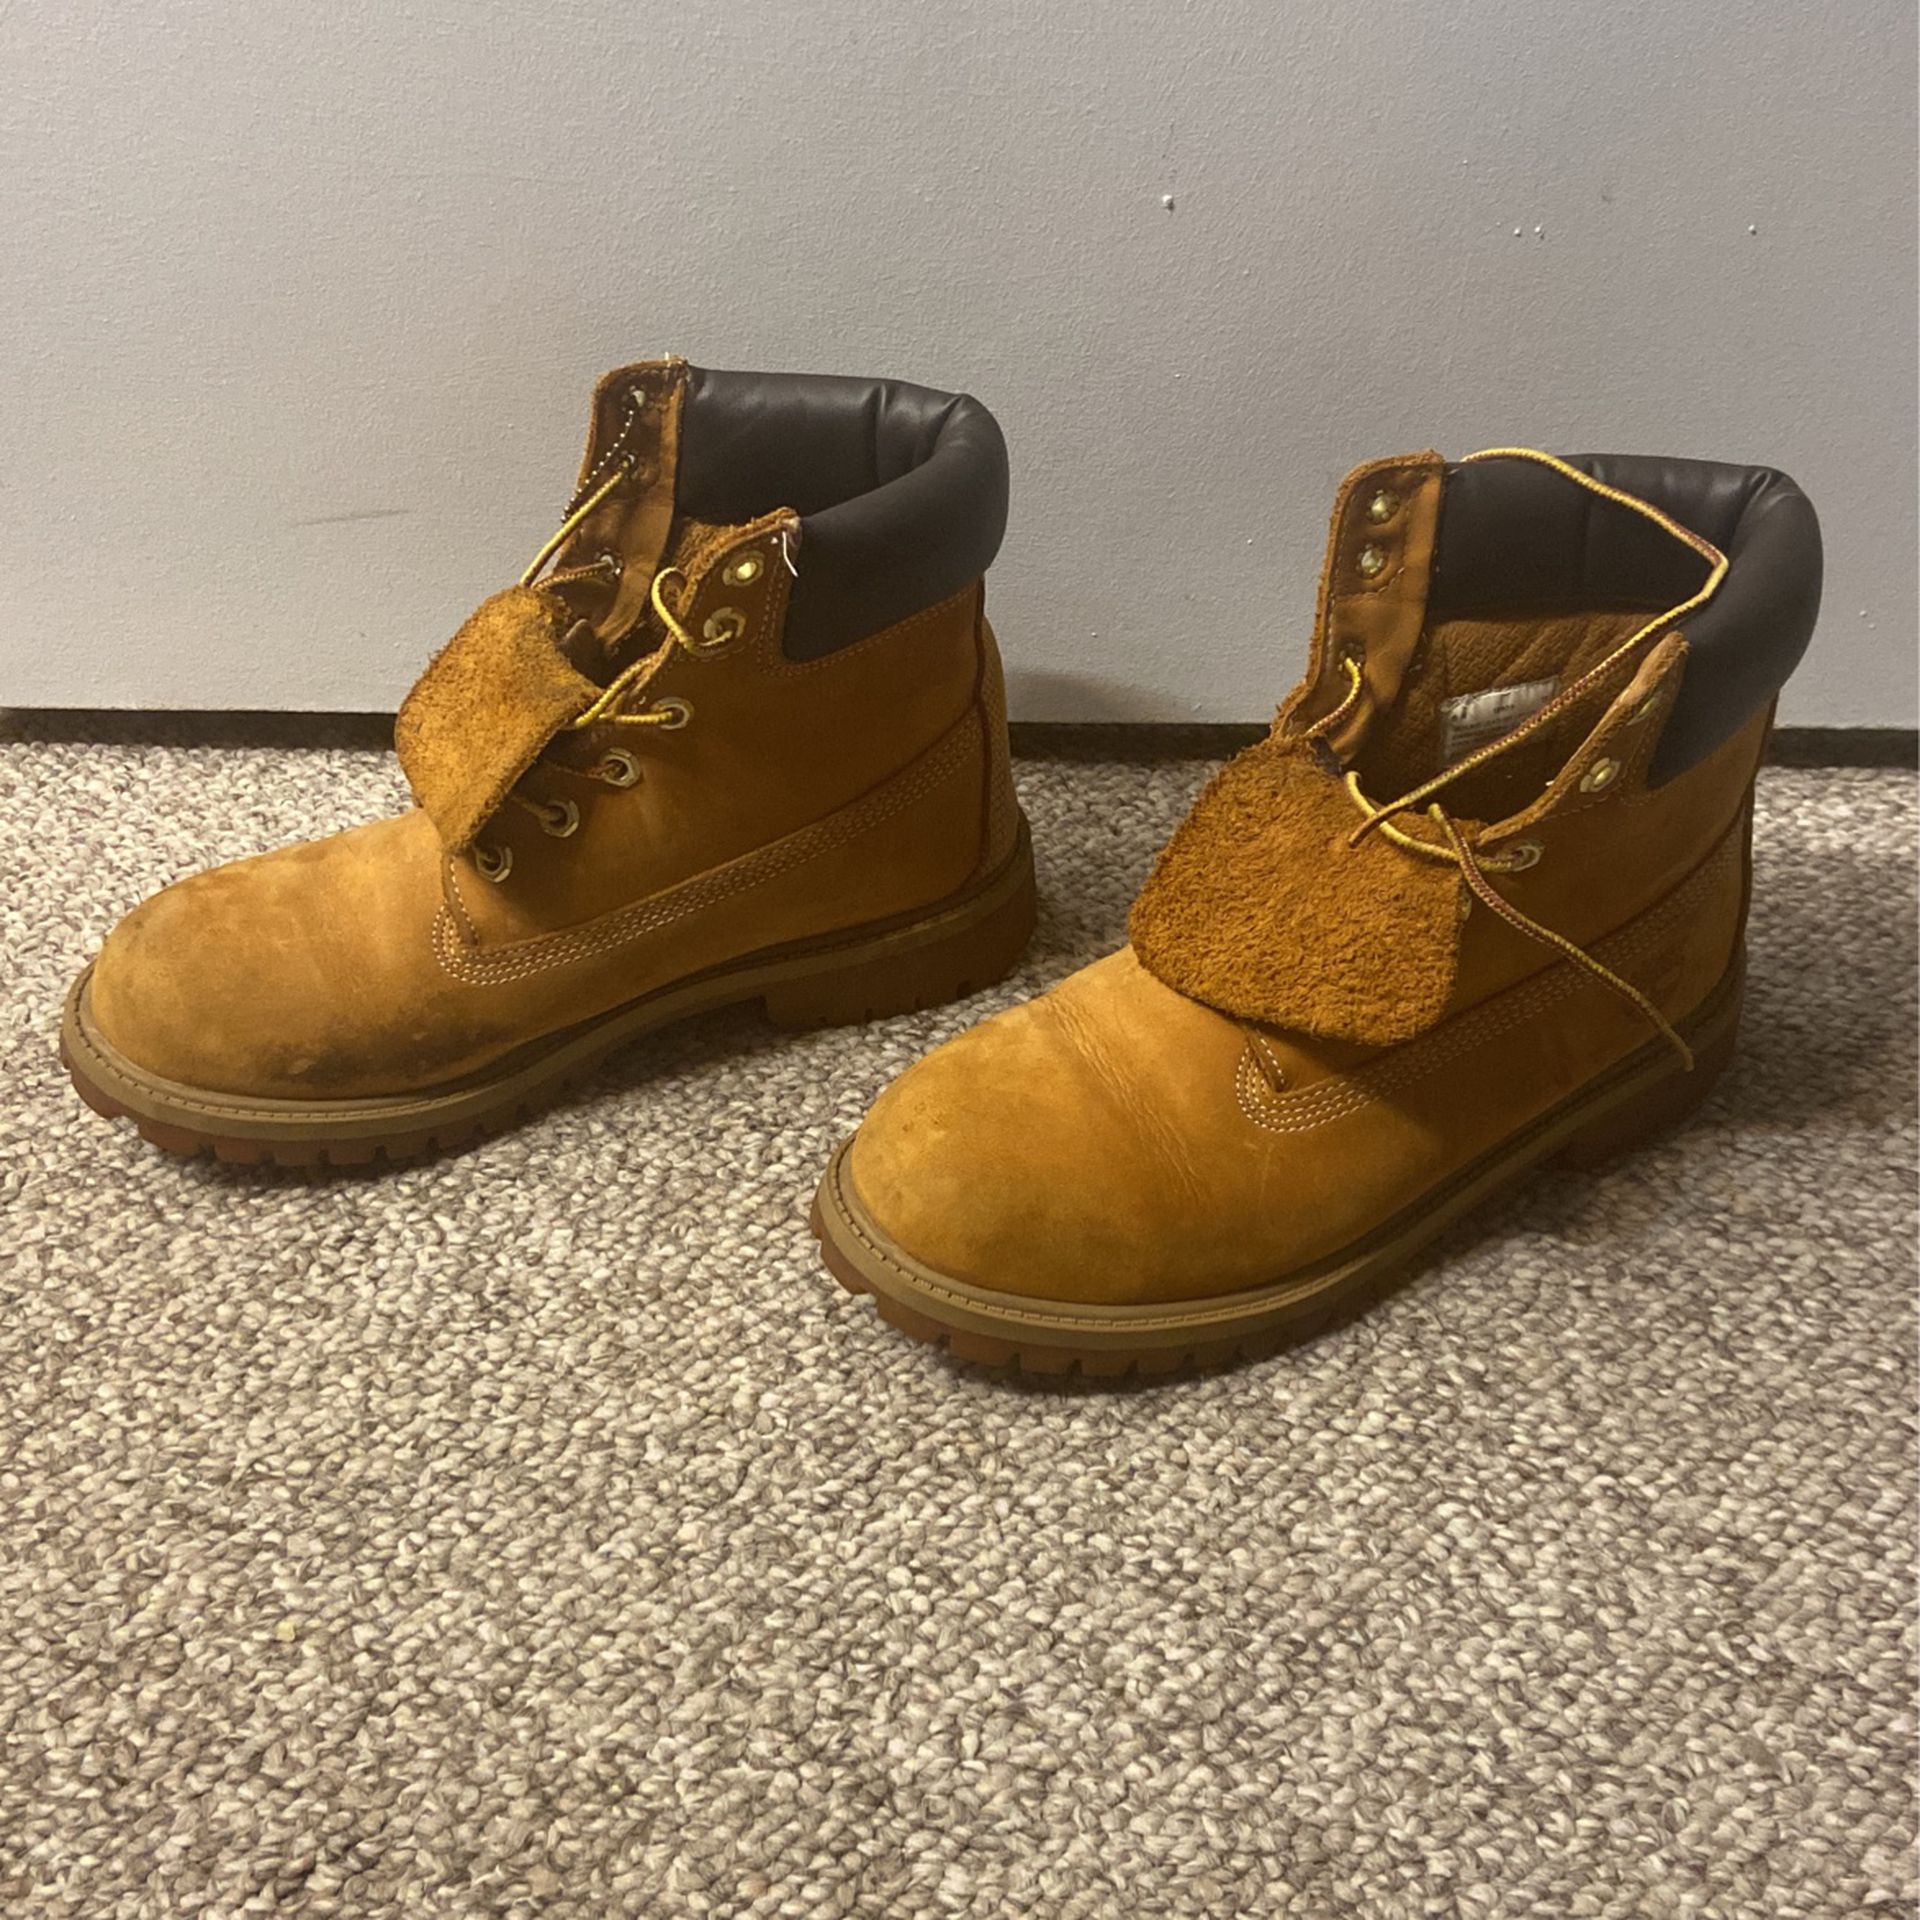 Women’s Size 6 Timberland Boots Work Boots